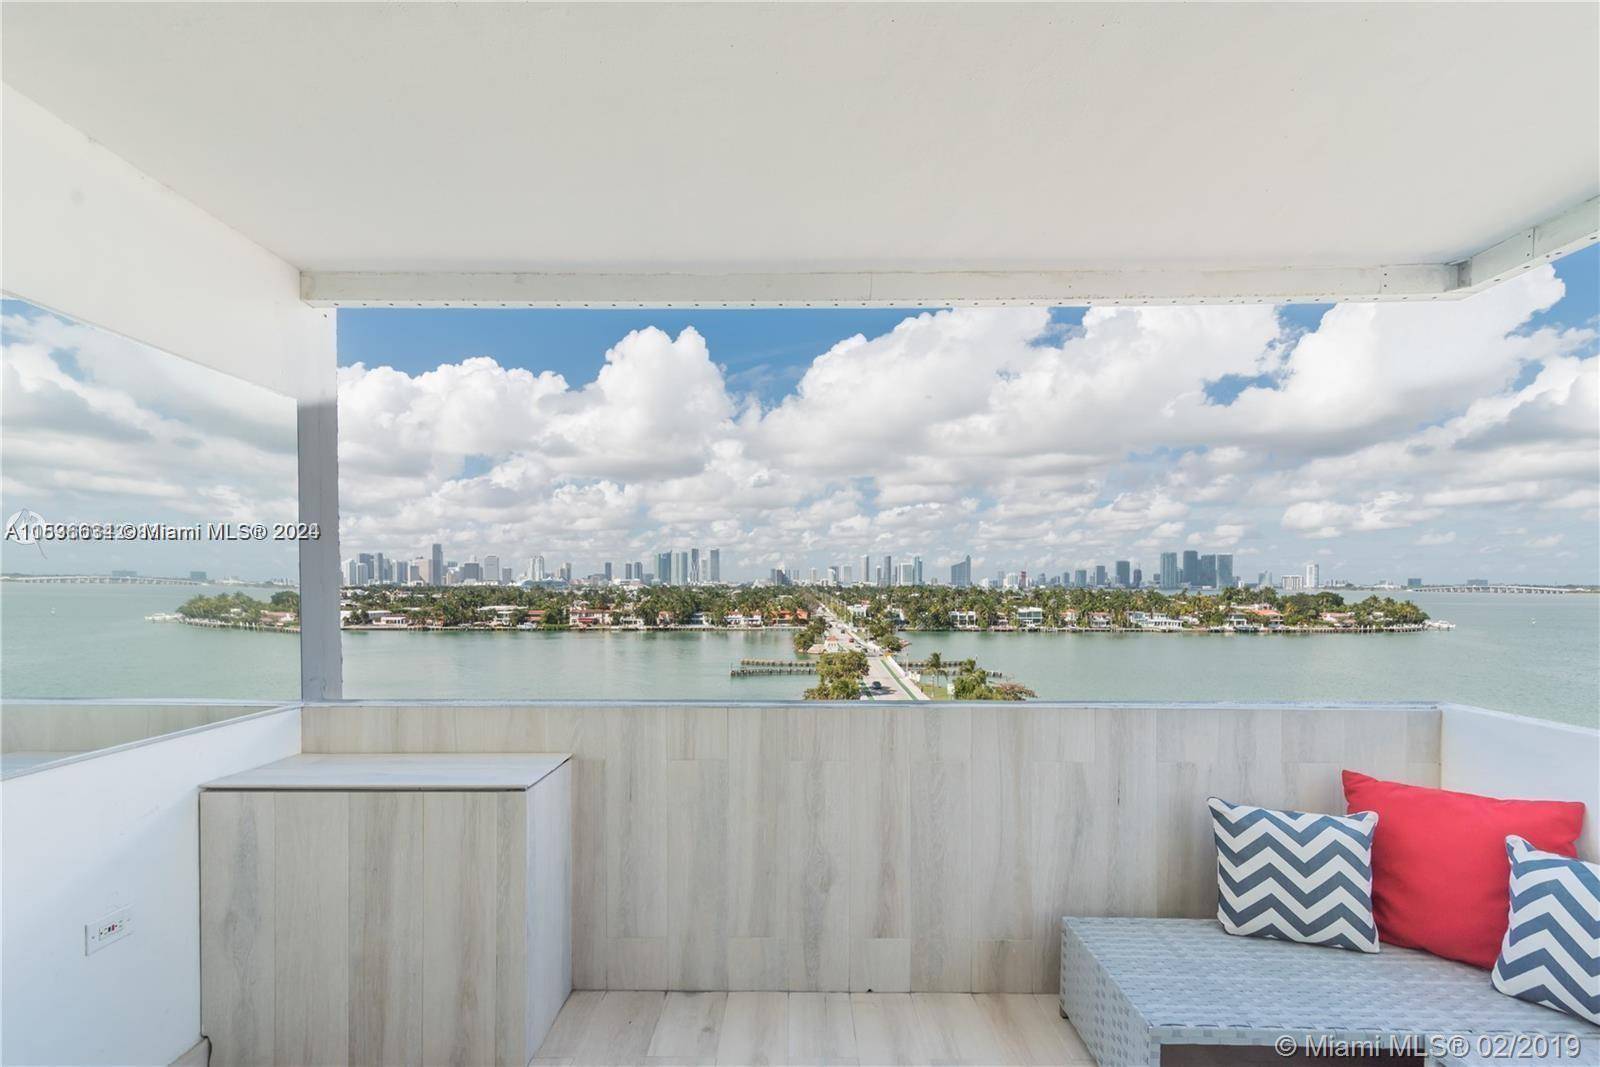 SOPHISTICATED One of a Kind Corner Unit with endless Panoramic Bay, Downtown Miami City Skyline Spectacular Sunset Views.